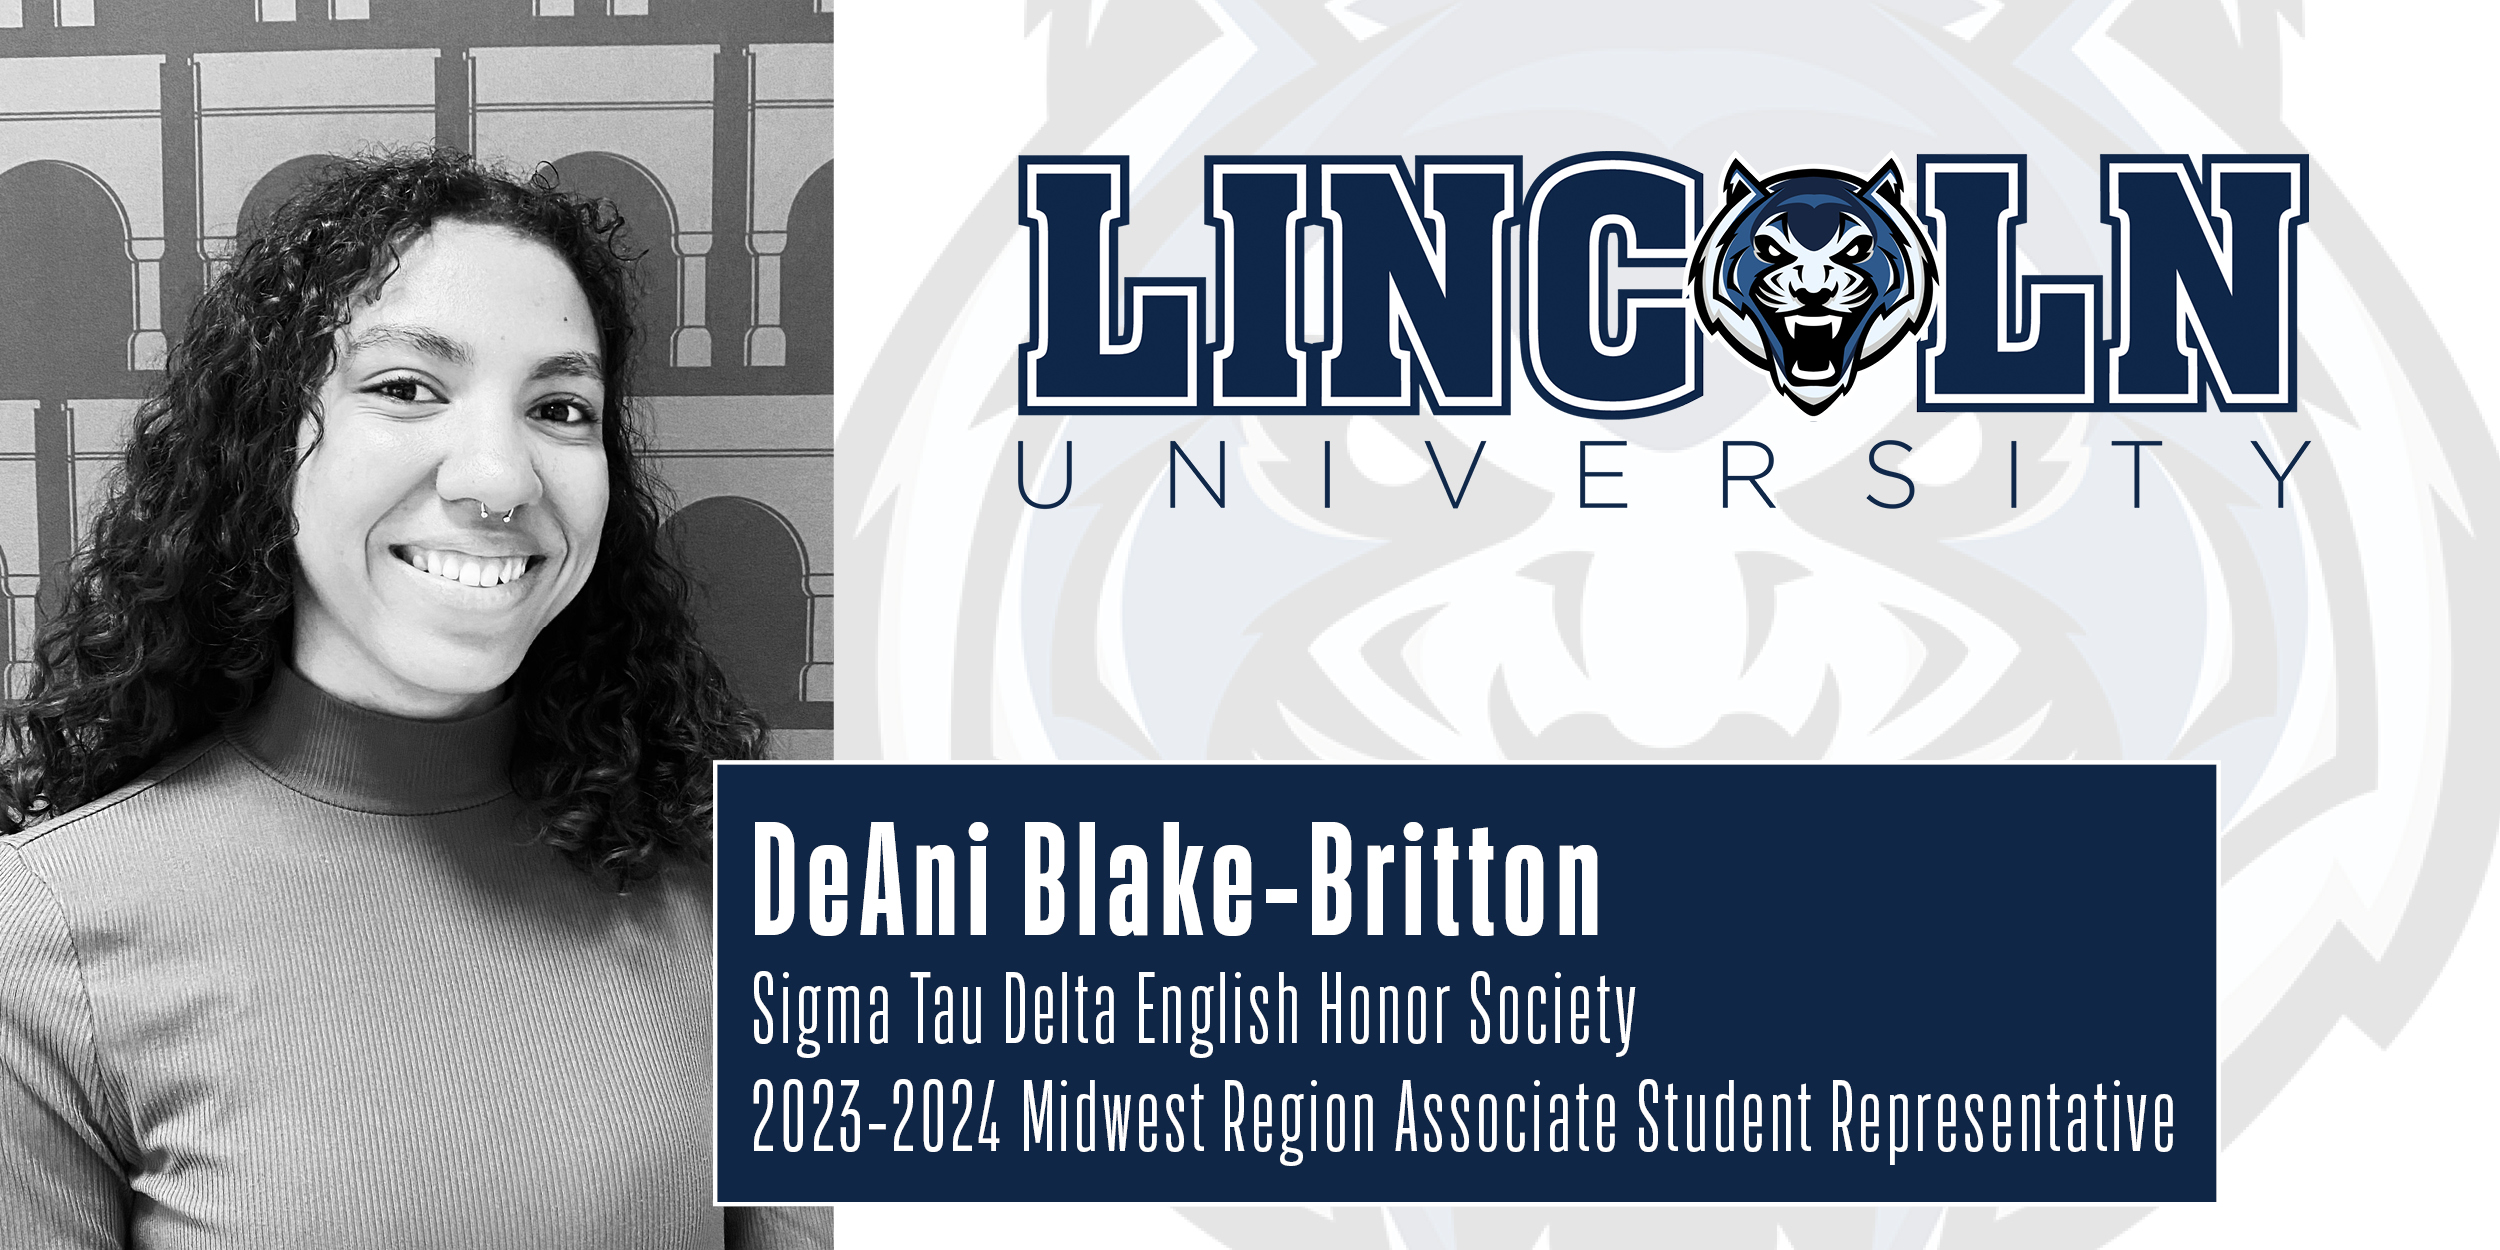 DeAni Blake-Britton, Lincoln University of Missouri student, named Sigma Tau Delta's 2023-2024 Midwest Region Associate Student Representative, bringing her passion for literature and leadership to the honor society's international stage.